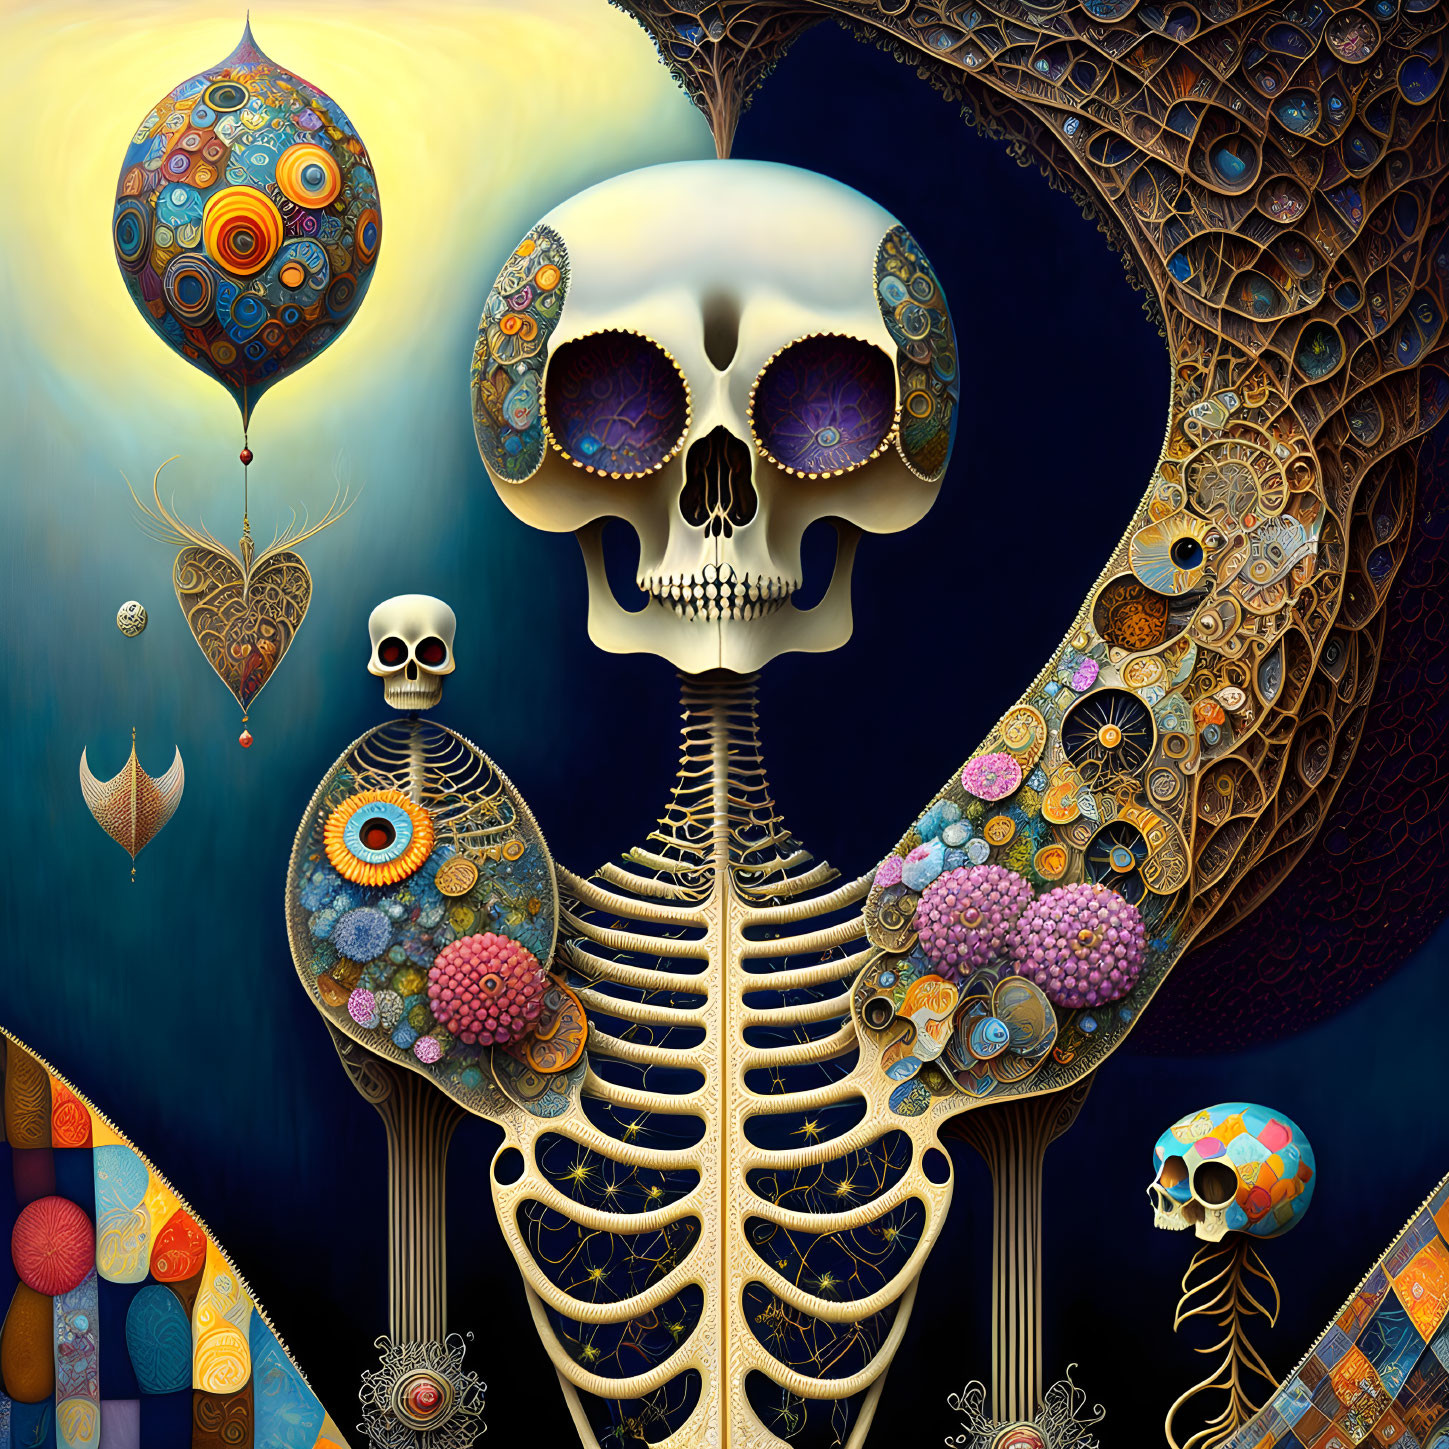 Colorful Artwork: Large Skull, Small Skulls, and Skeletons Amidst Ornaments